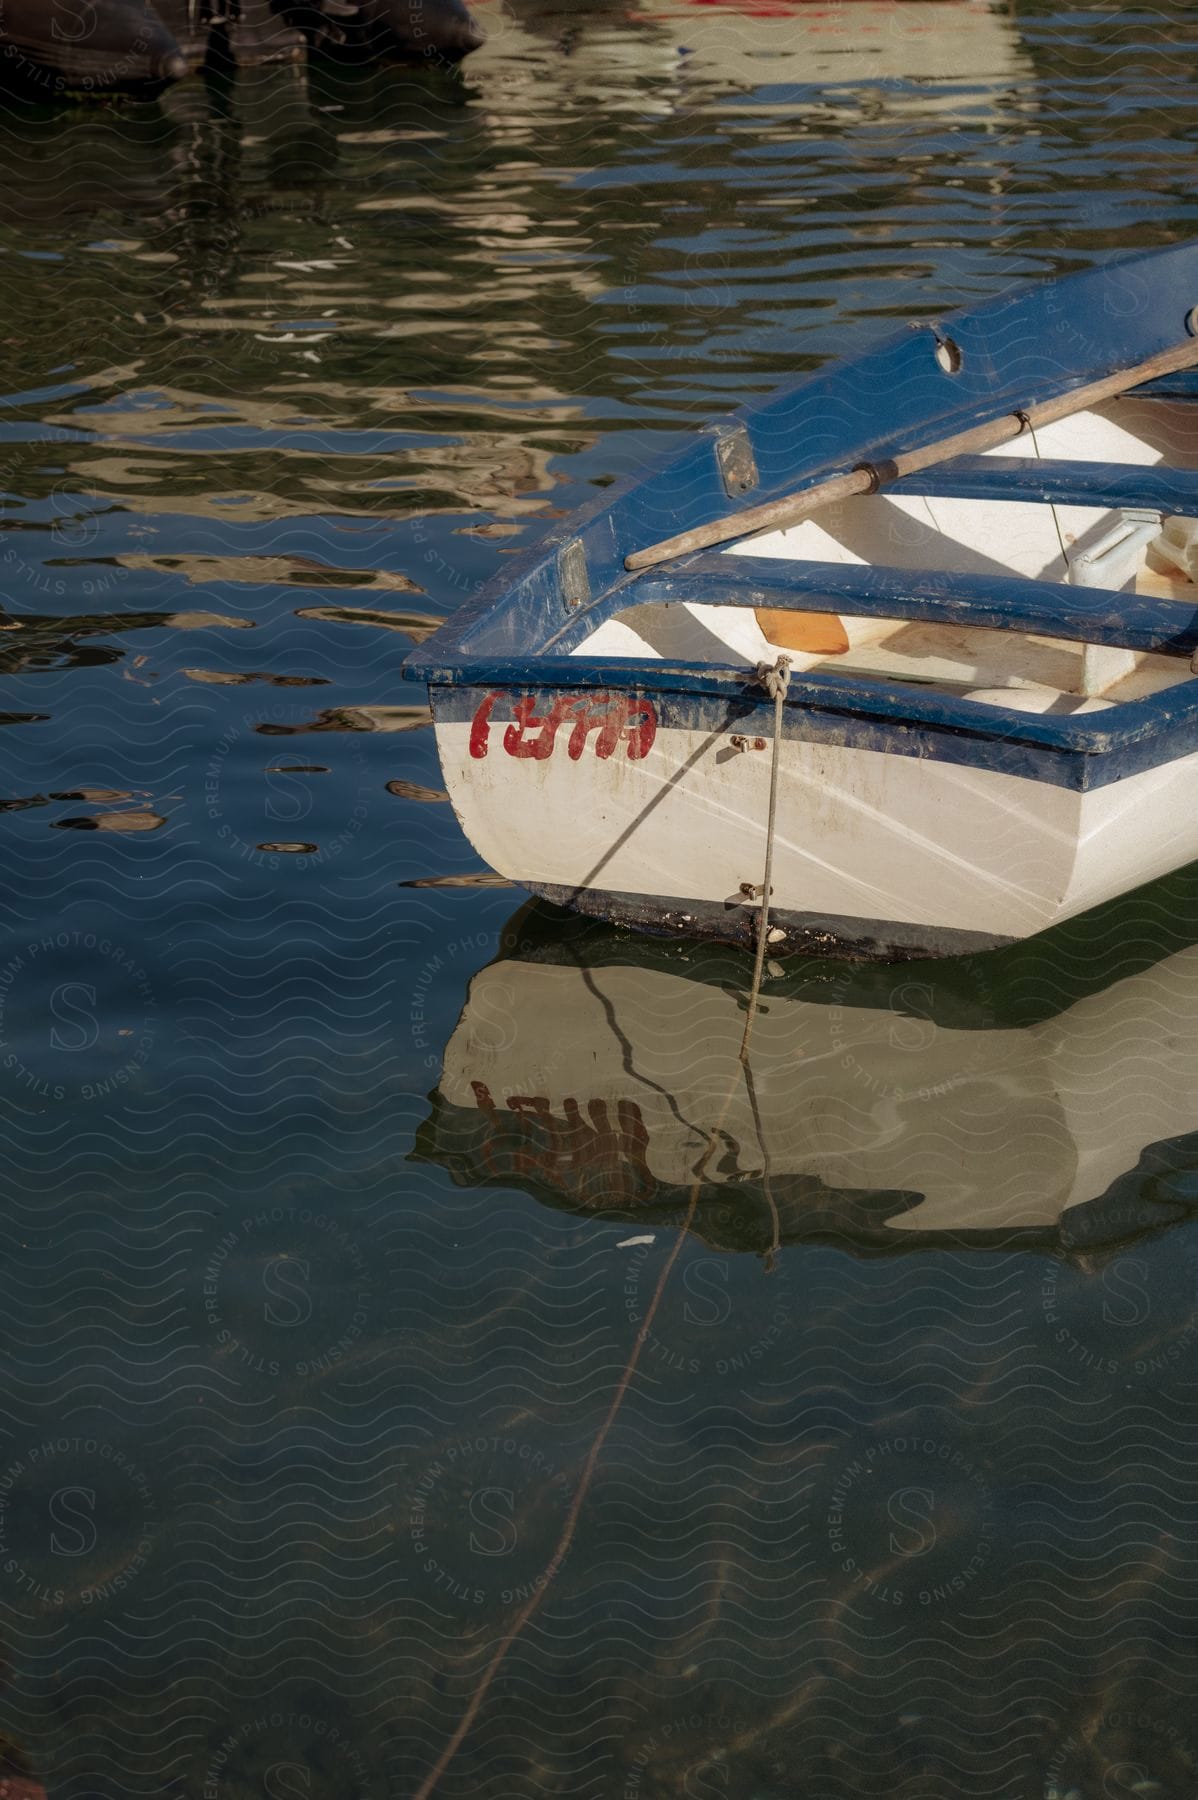 A small wooden boat is moored on a body of water.